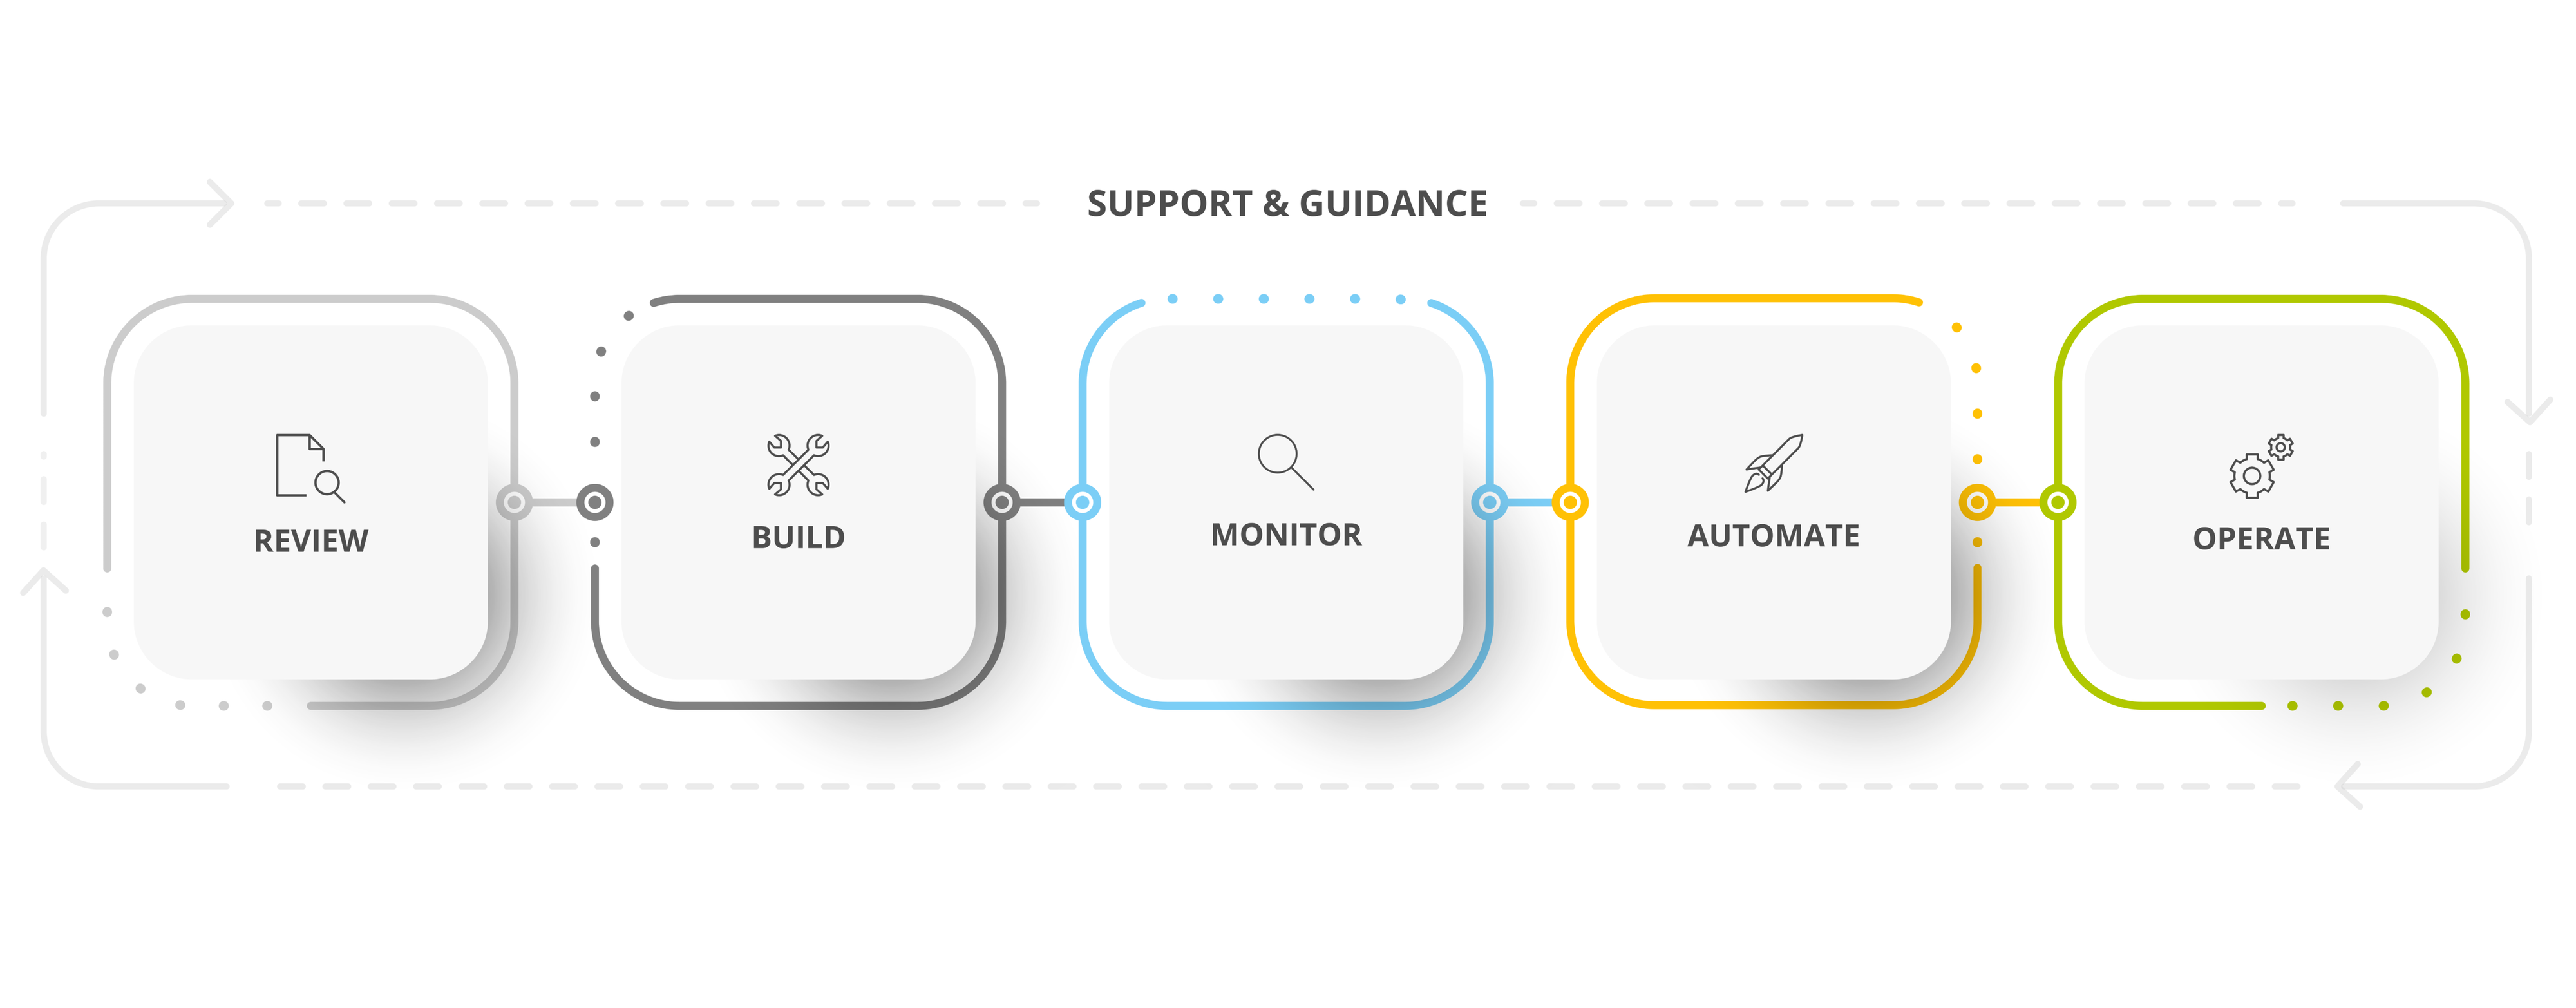 Bild Support & Guidance AWS Managed Services